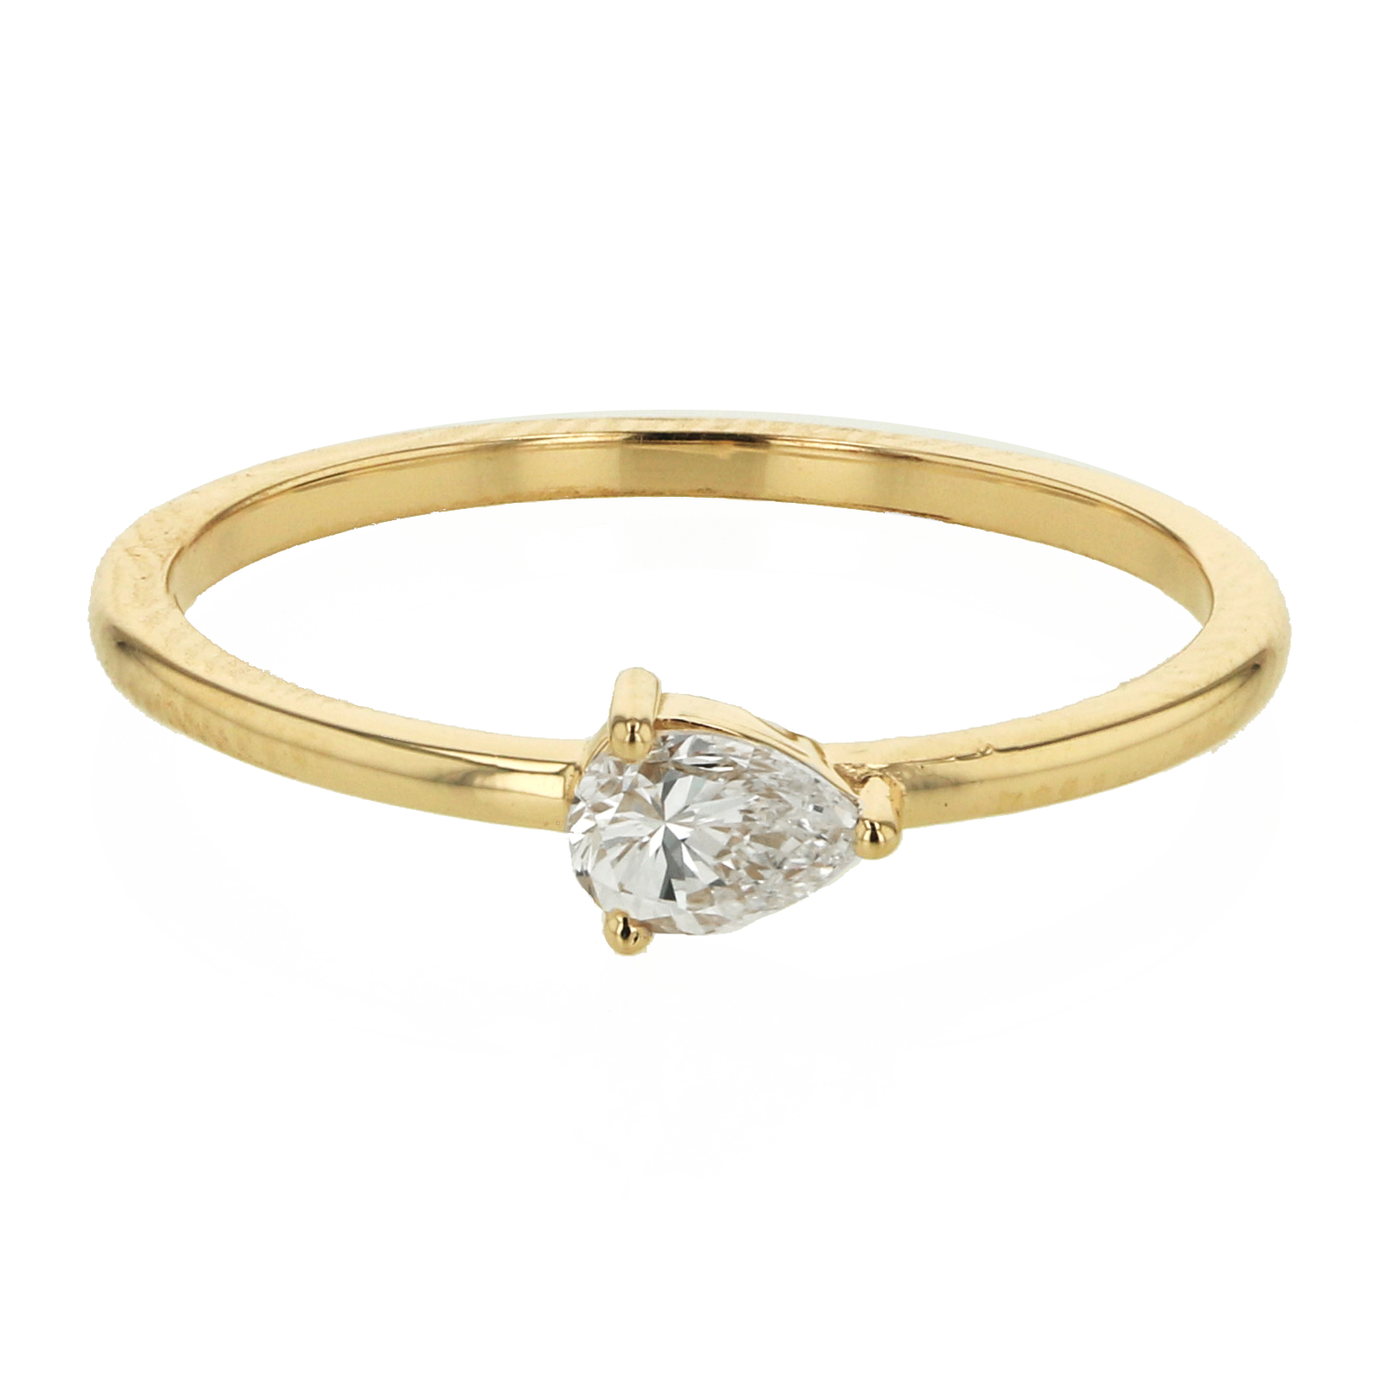 "BlissPear" 0.25 CT Pear Shaped Solitaire Diamond Ring